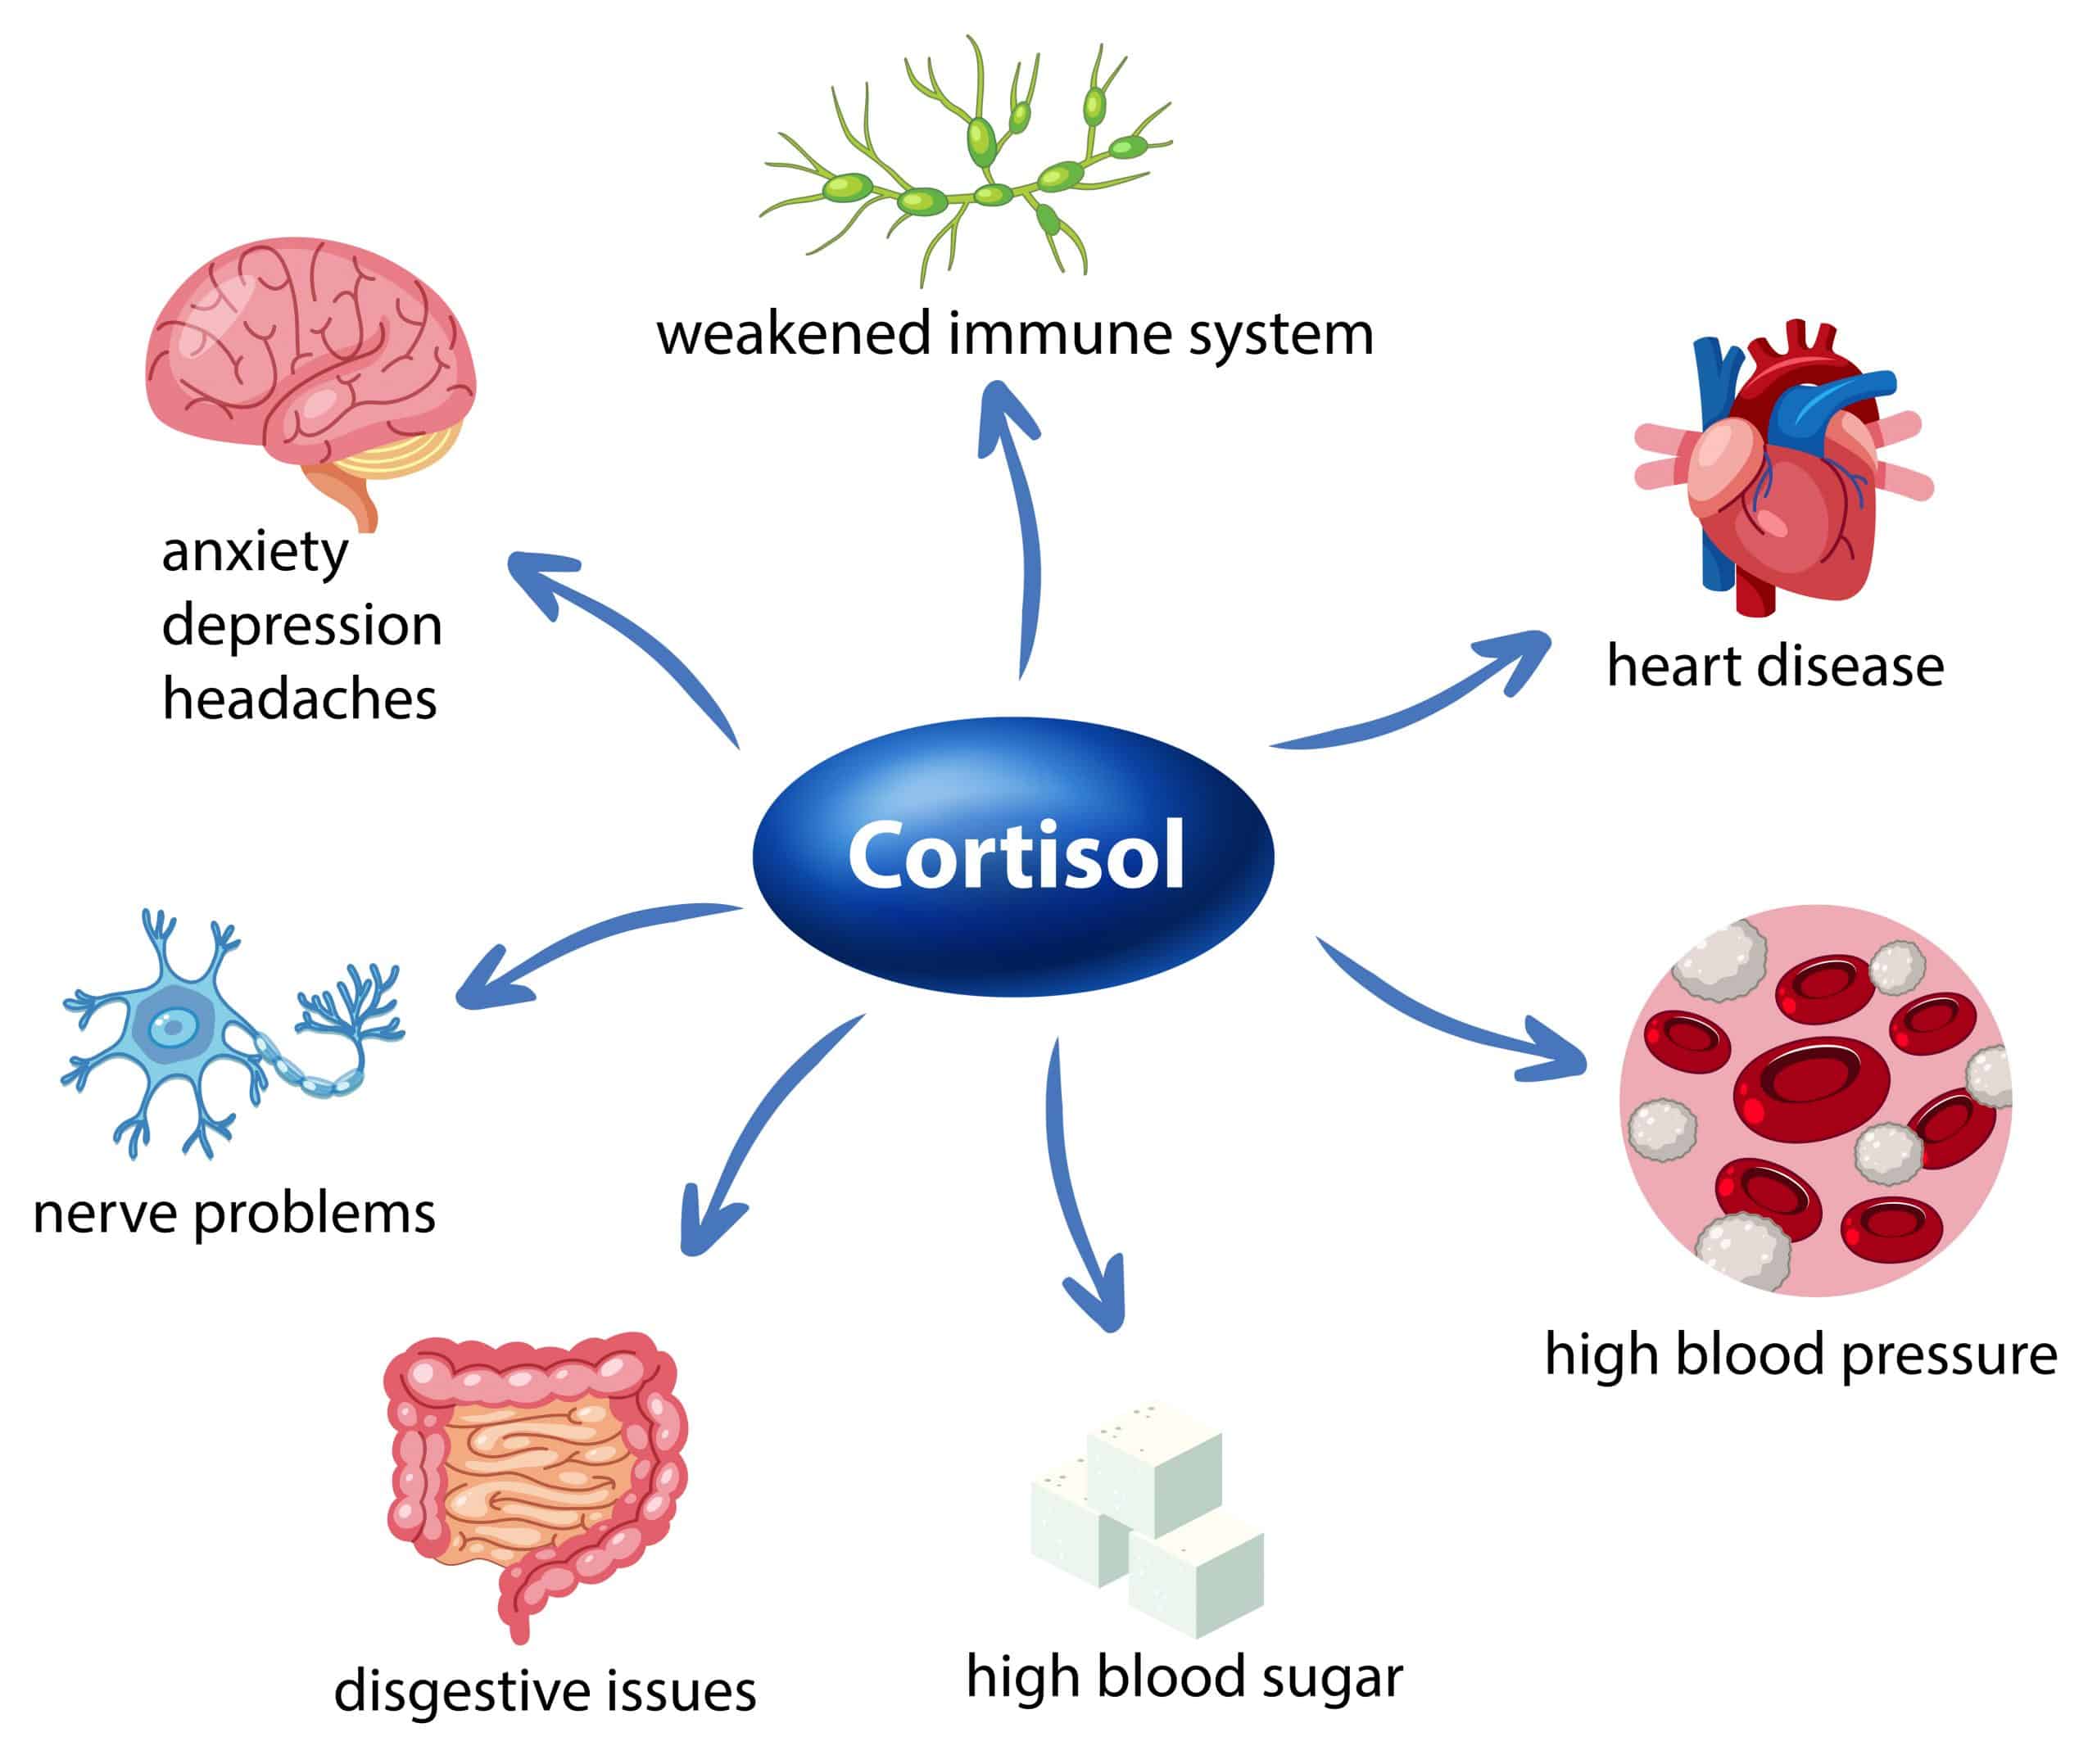 How does diet affect cortisol